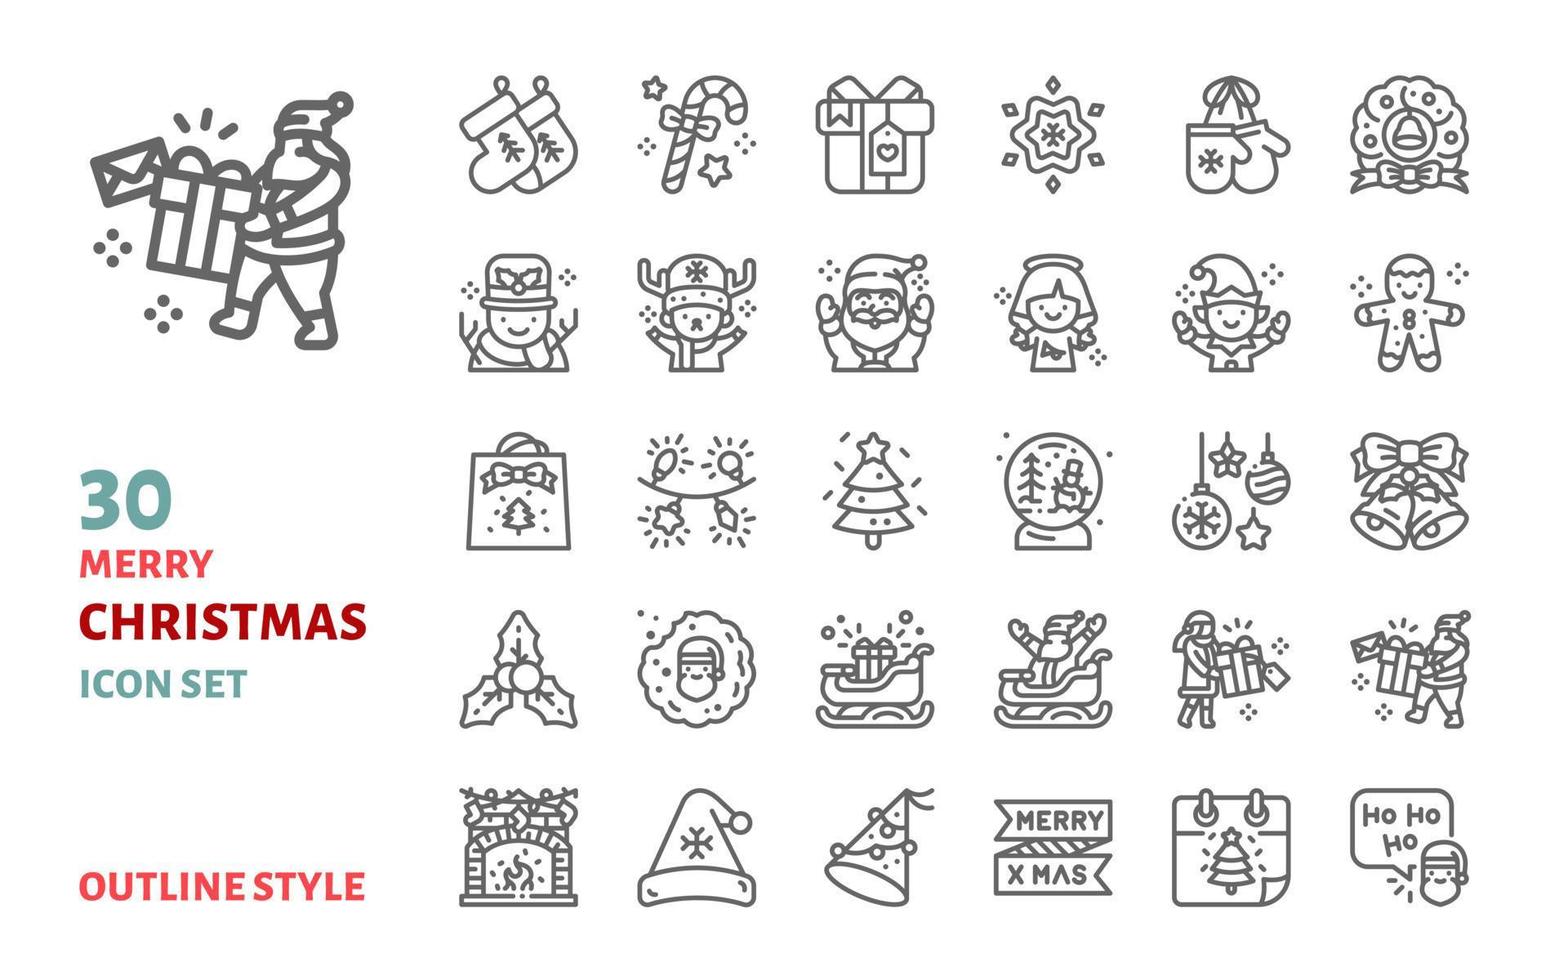 Merry christmas outline icon vector illustration.